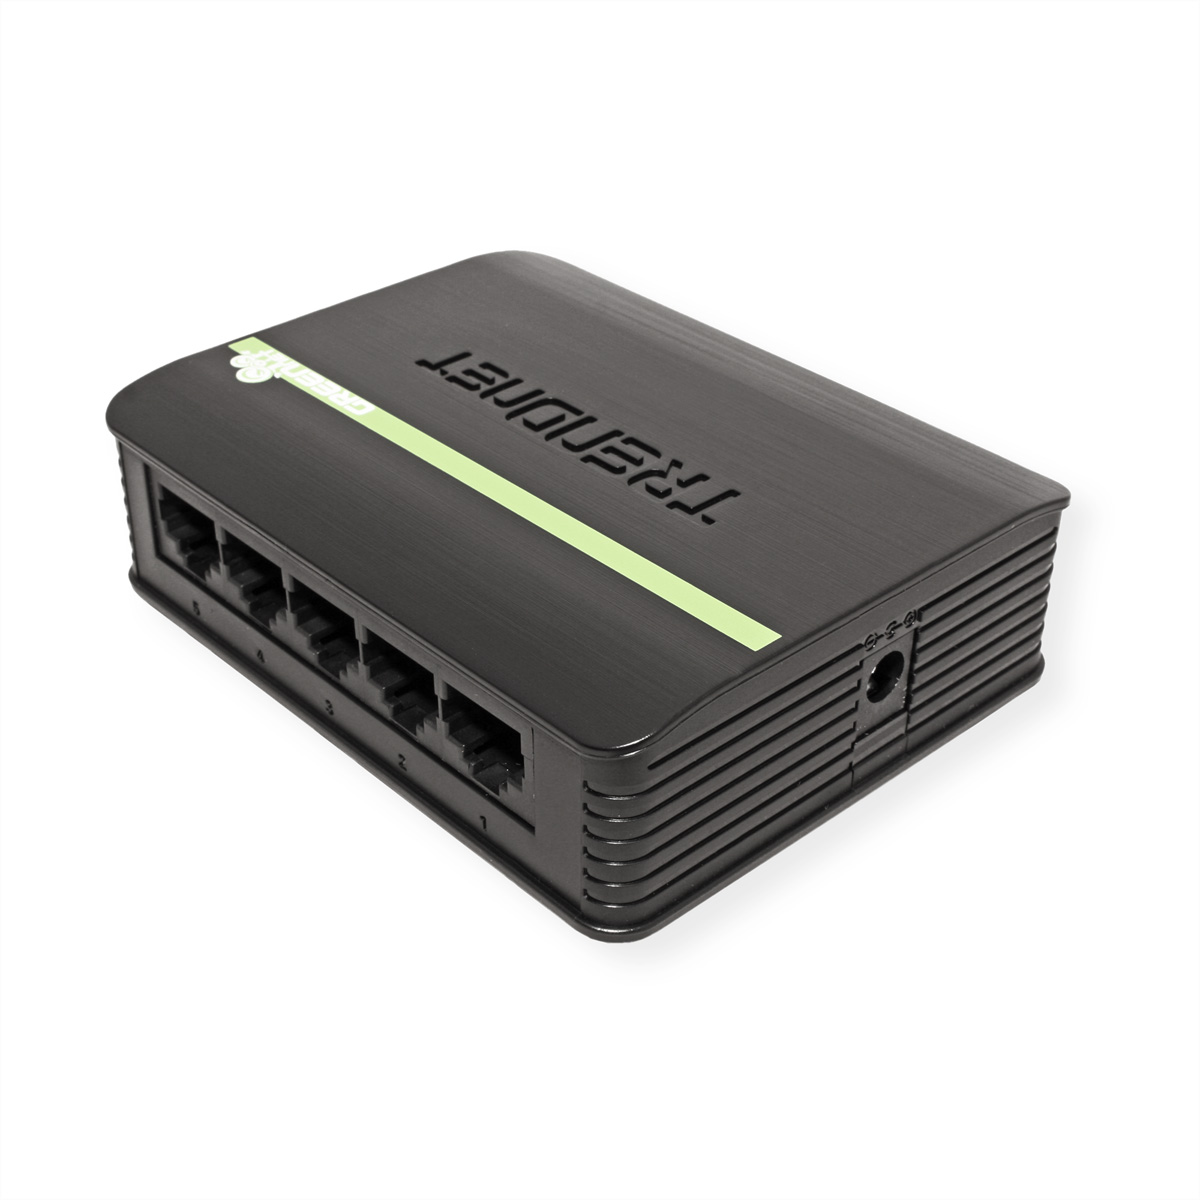 Fast Switch 10/100Mbps TRENDNET Ethernet Switch 5-Port